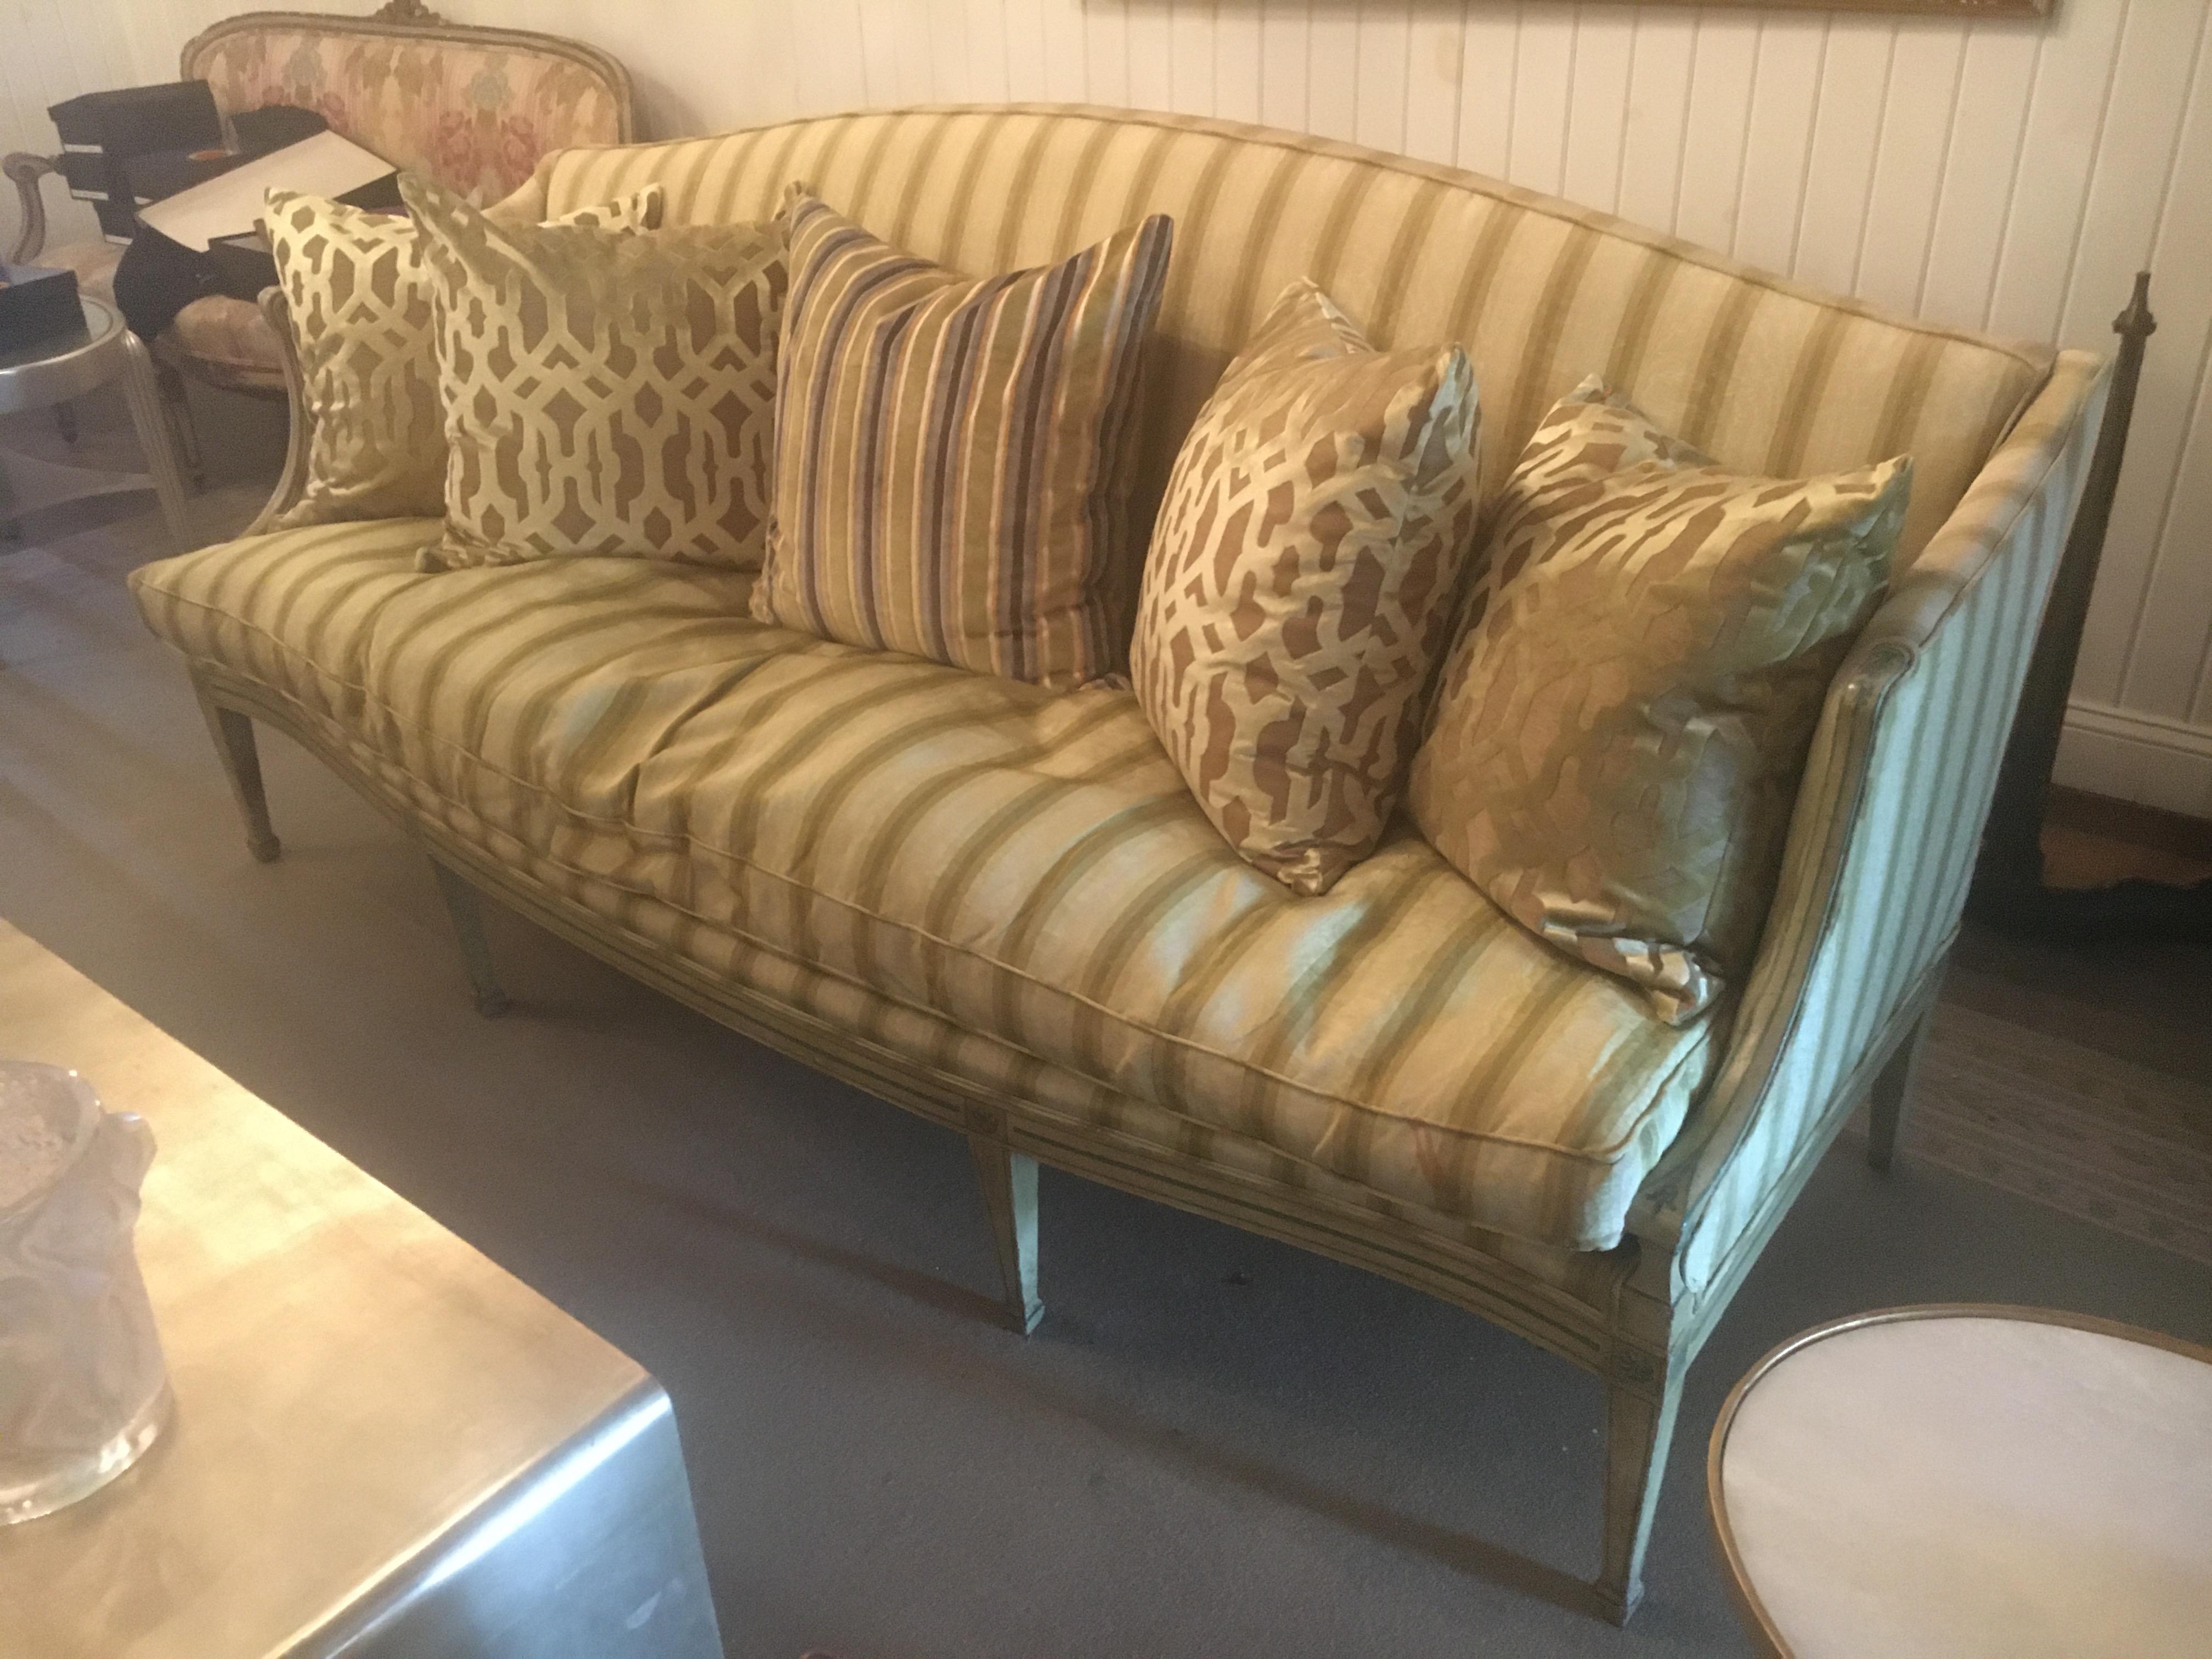 Handsome 19th century Italian neoclassical sofa with painted decoration. Celadon stripped silk upholstery.